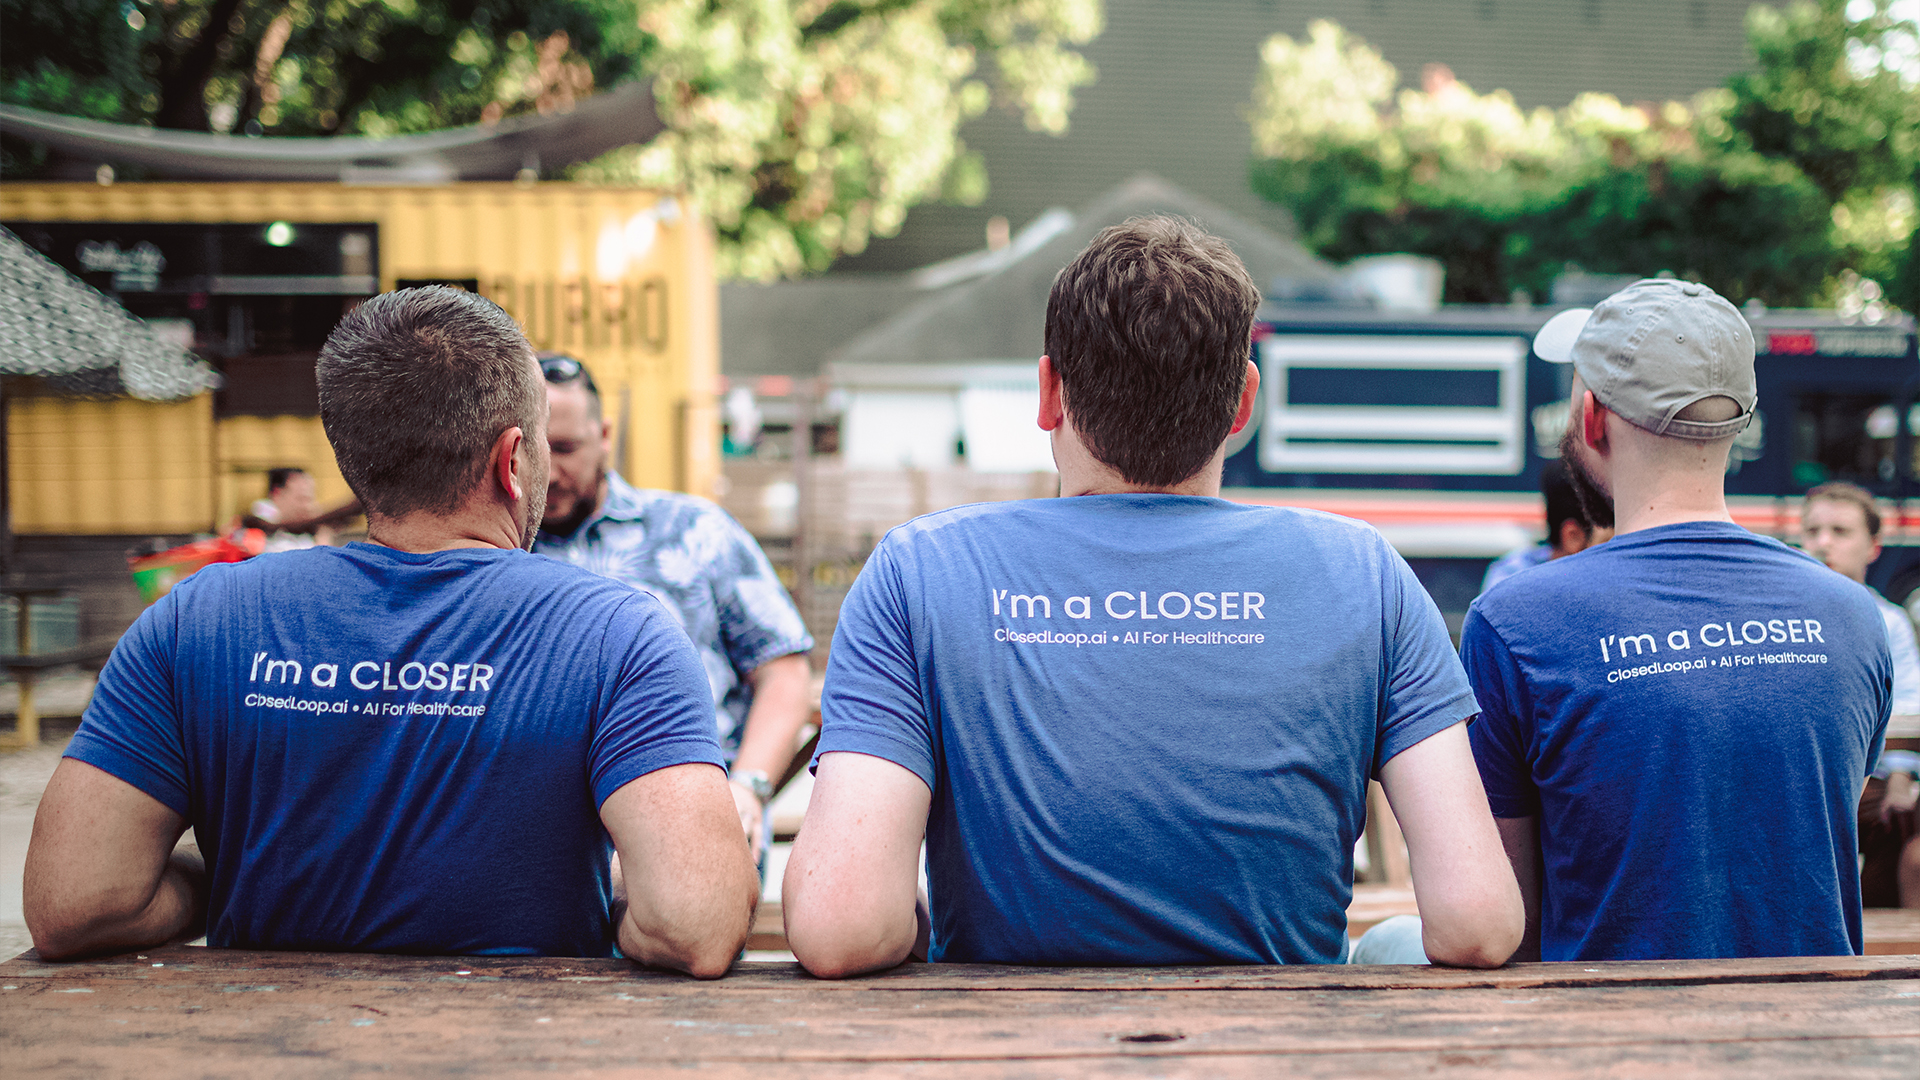 The backs of three ClosedLoop employees, wearing shirts that read “I’m a Closer” 